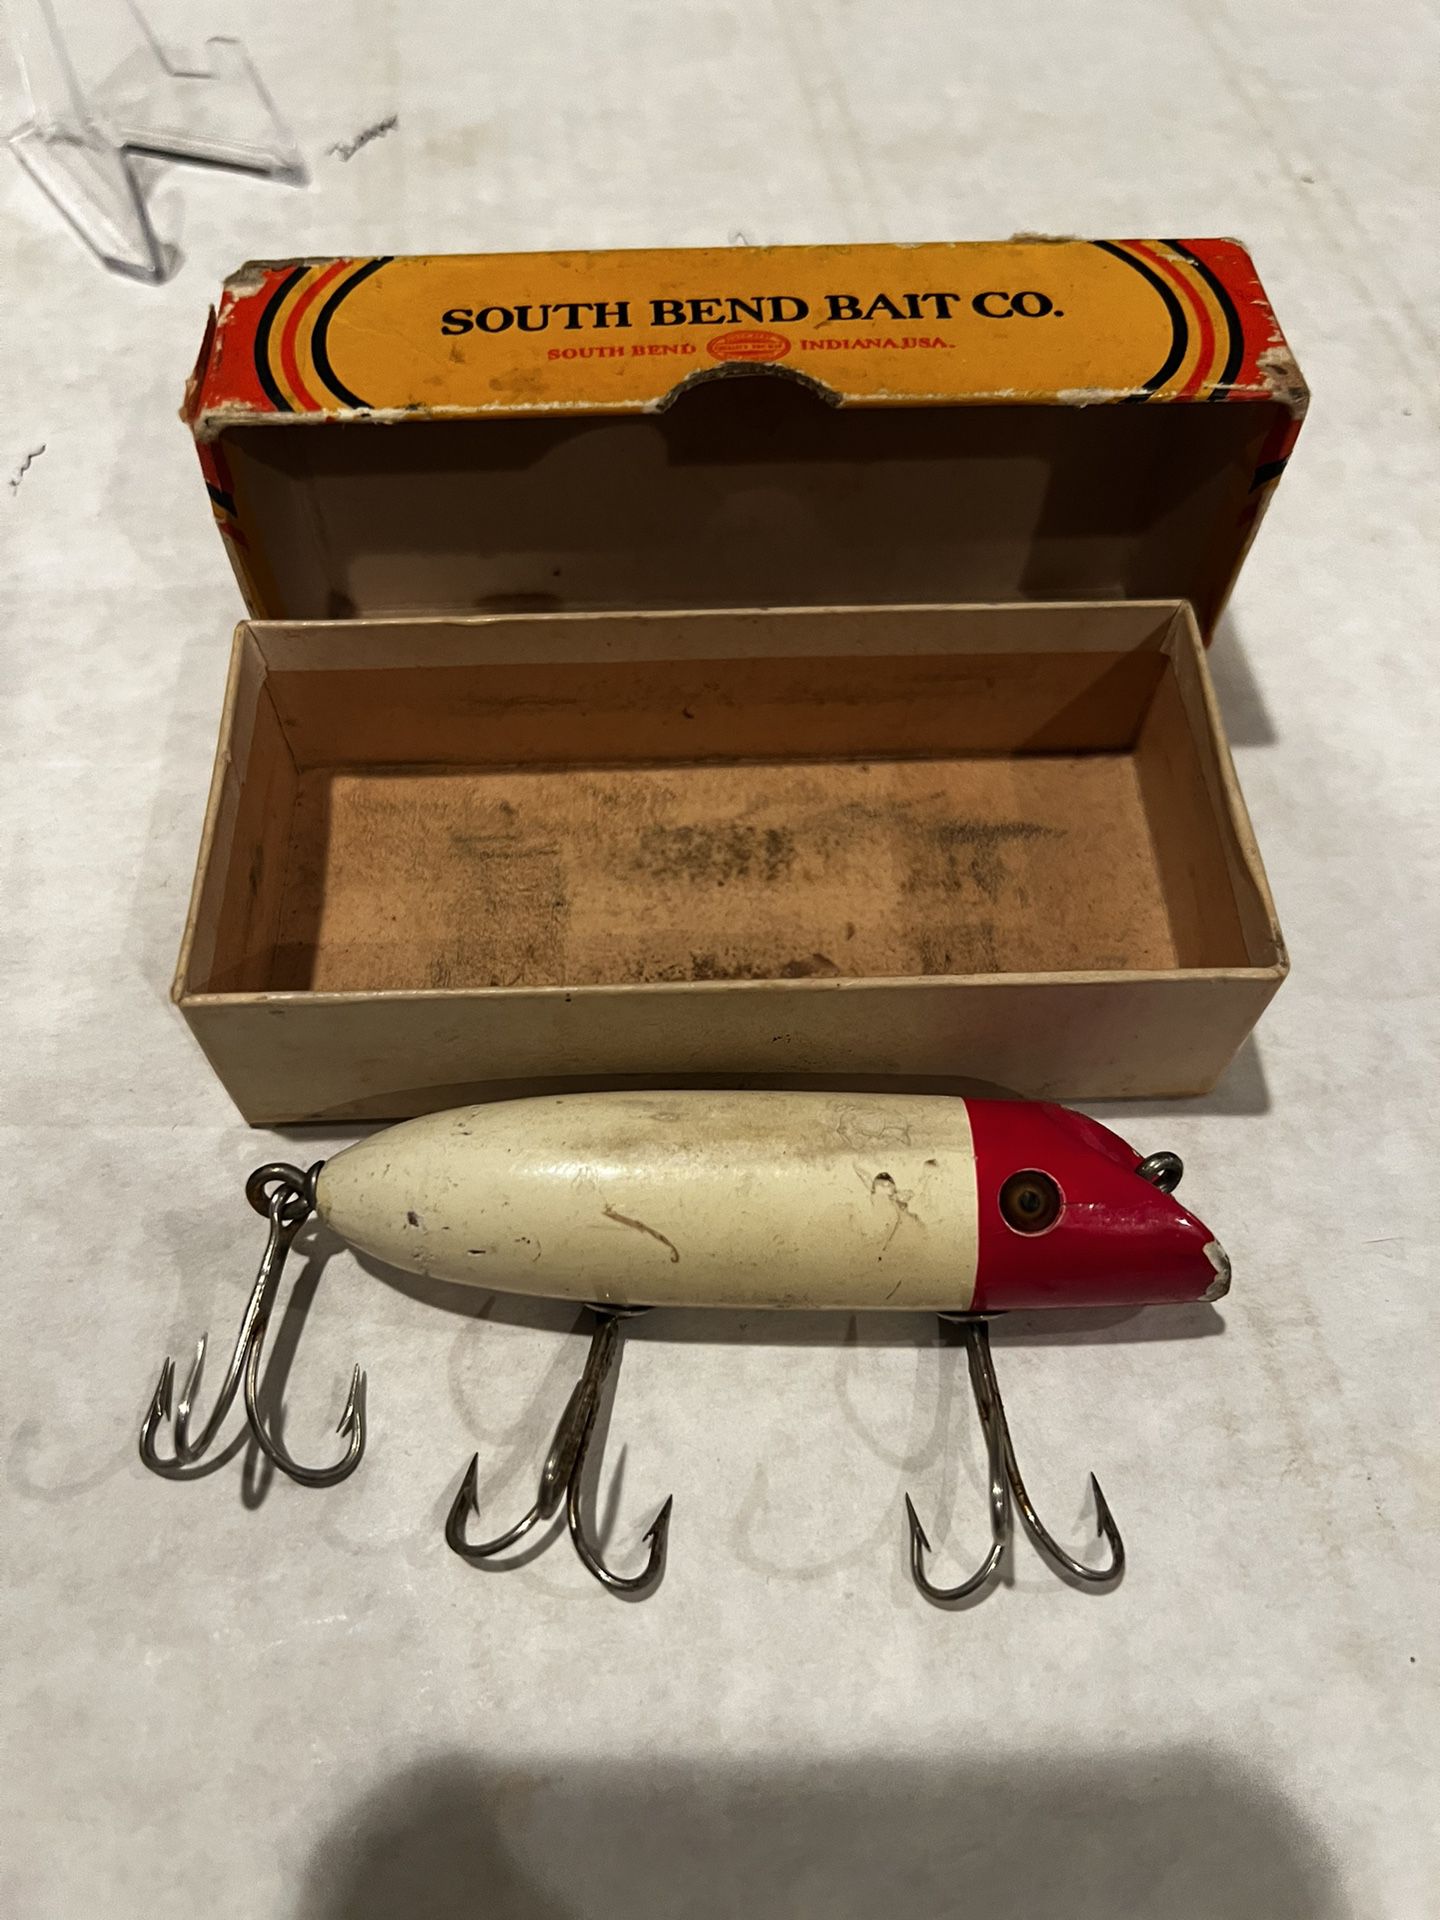 VINTAGE South Bend Bass-Oreno #973 Lure for Sale in Dauberville, PA -  OfferUp